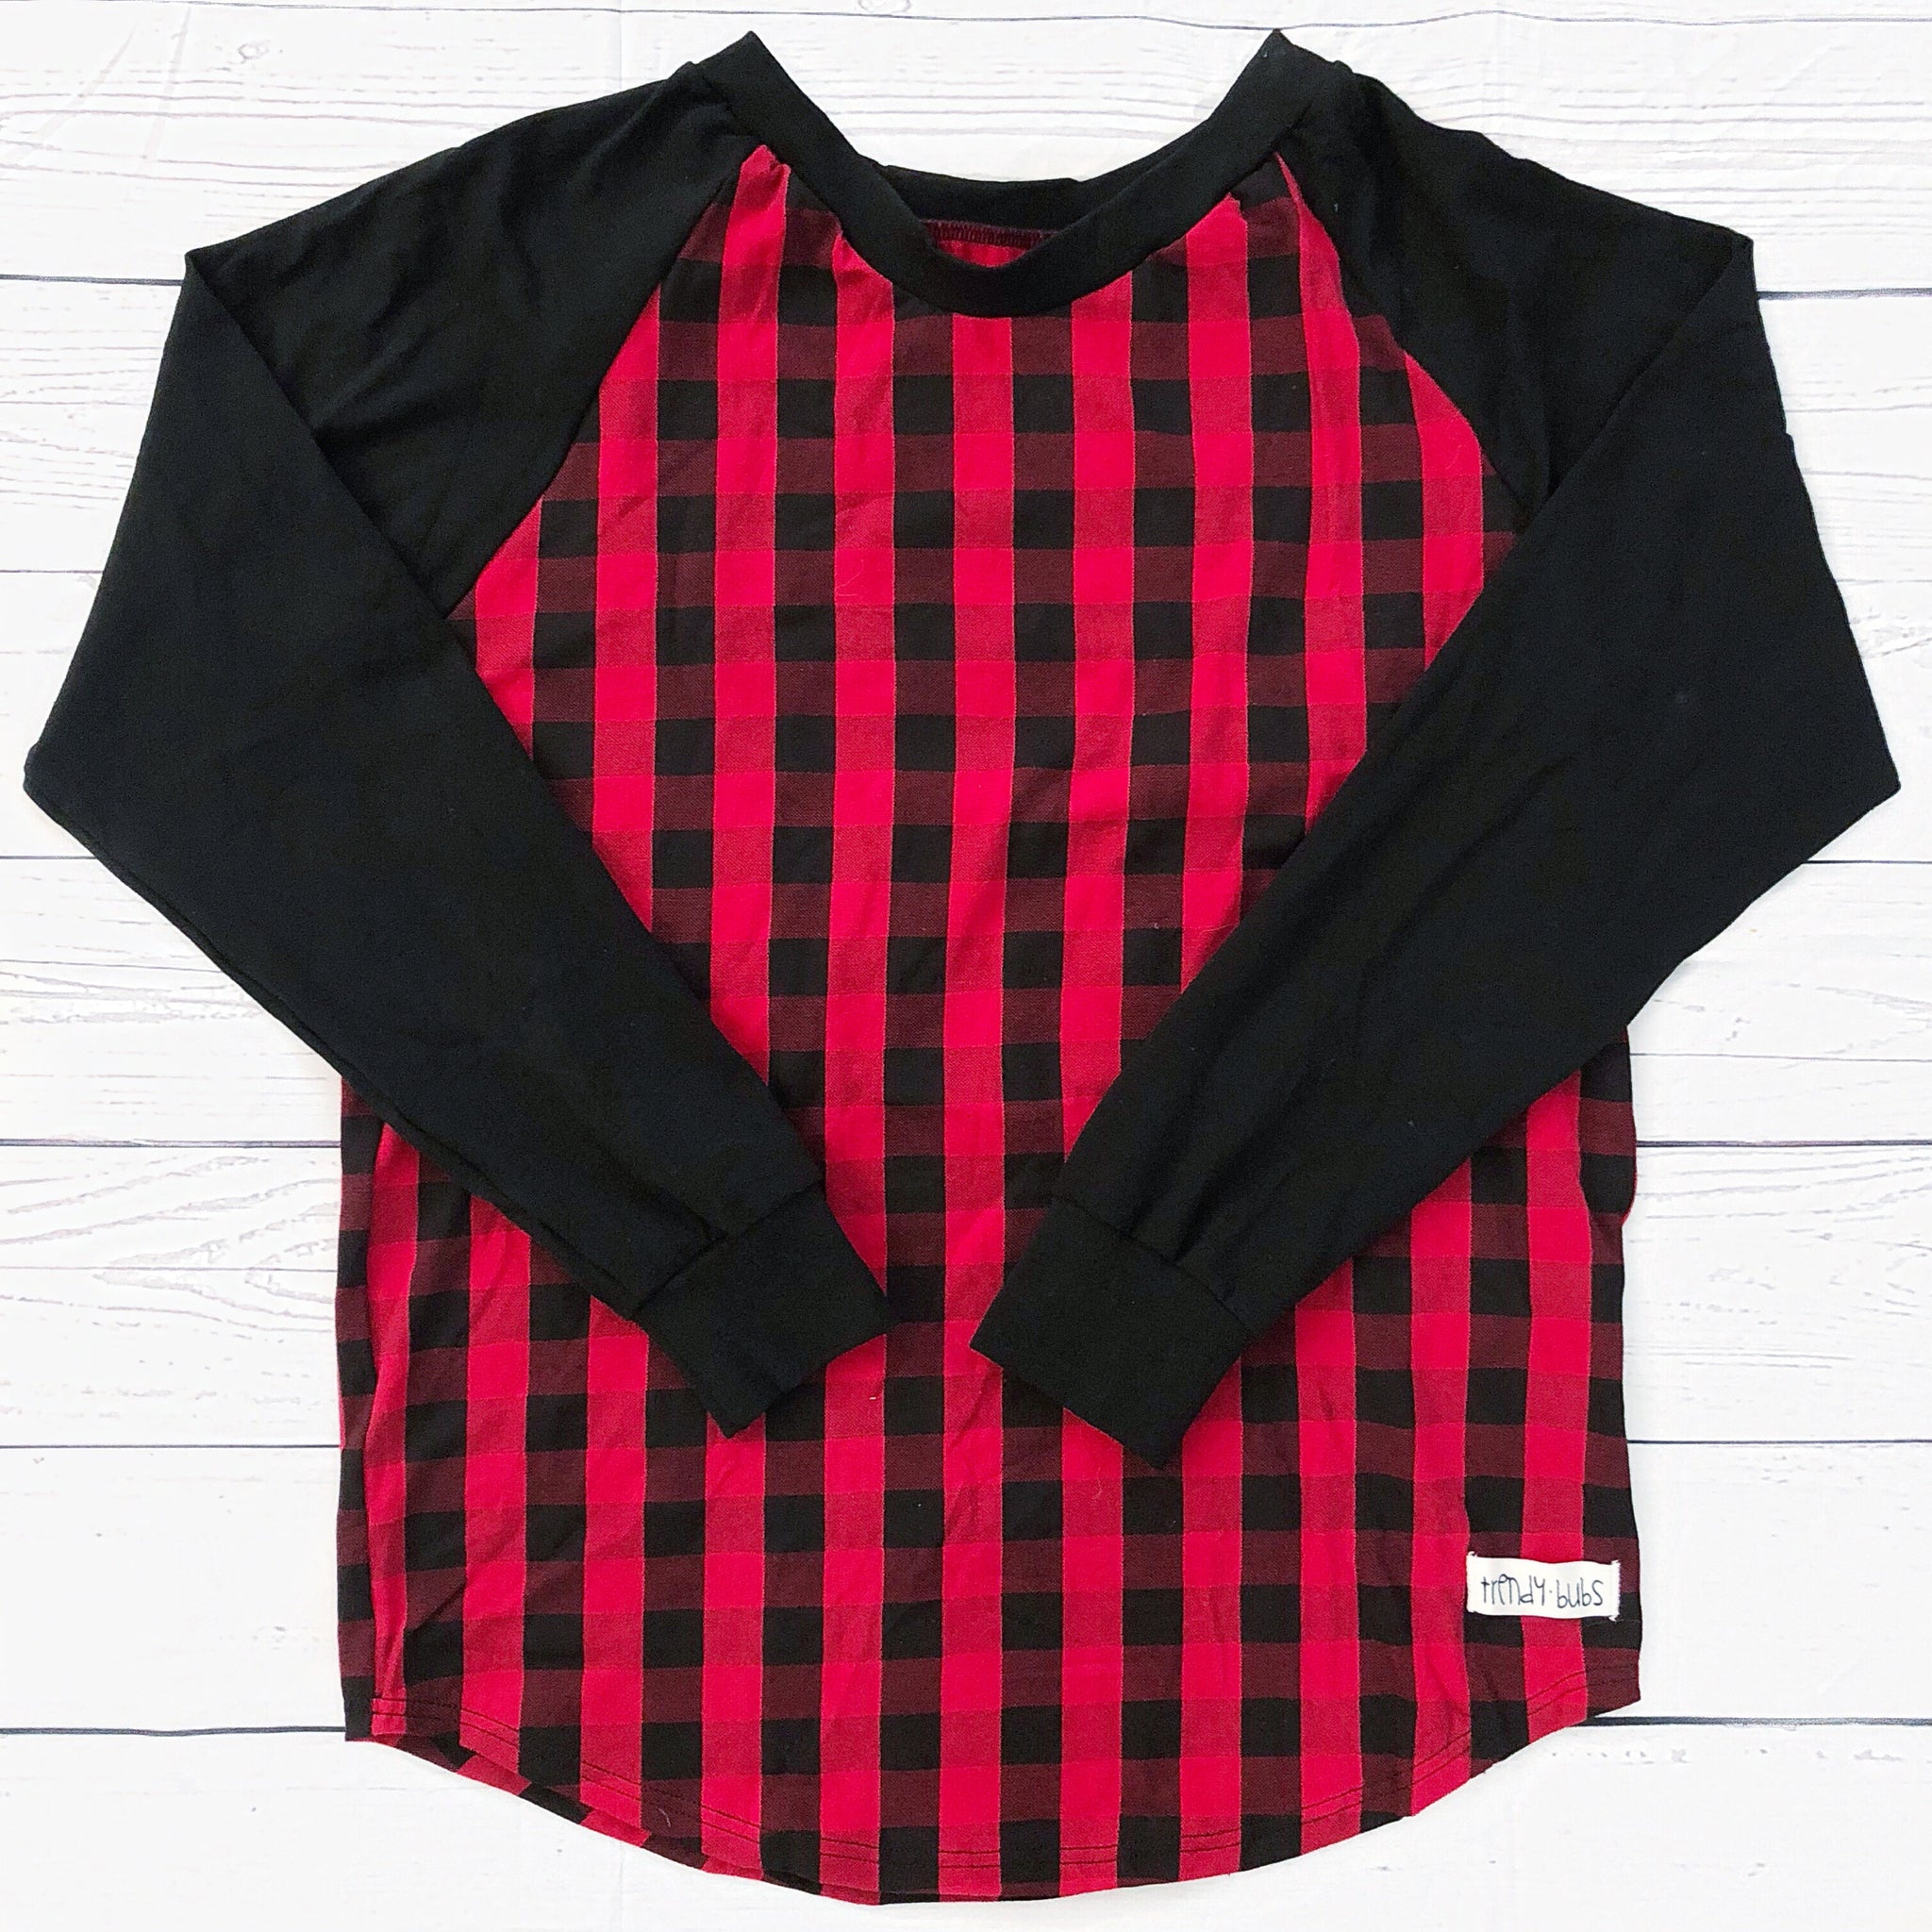 red and black plaid women's clothing